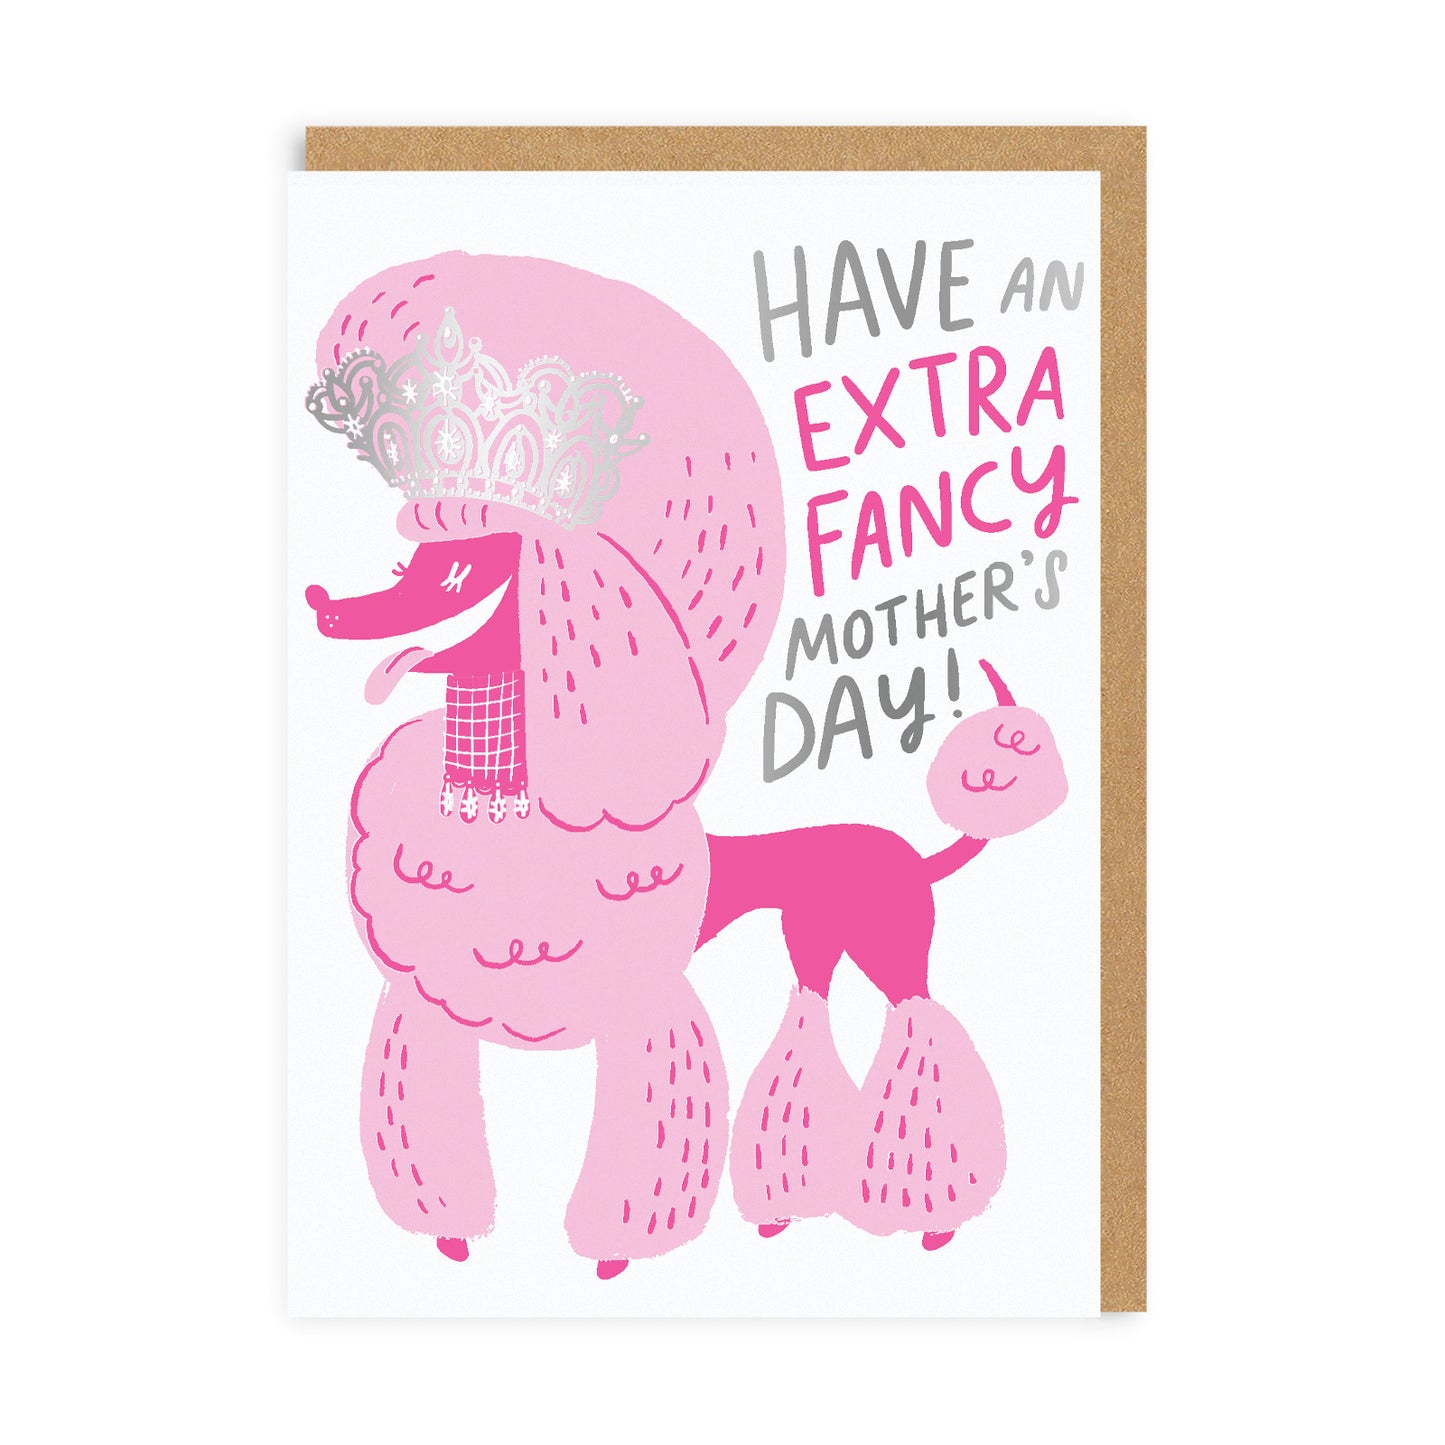 Have An Extra Fancy Mothers day! Greeting Card